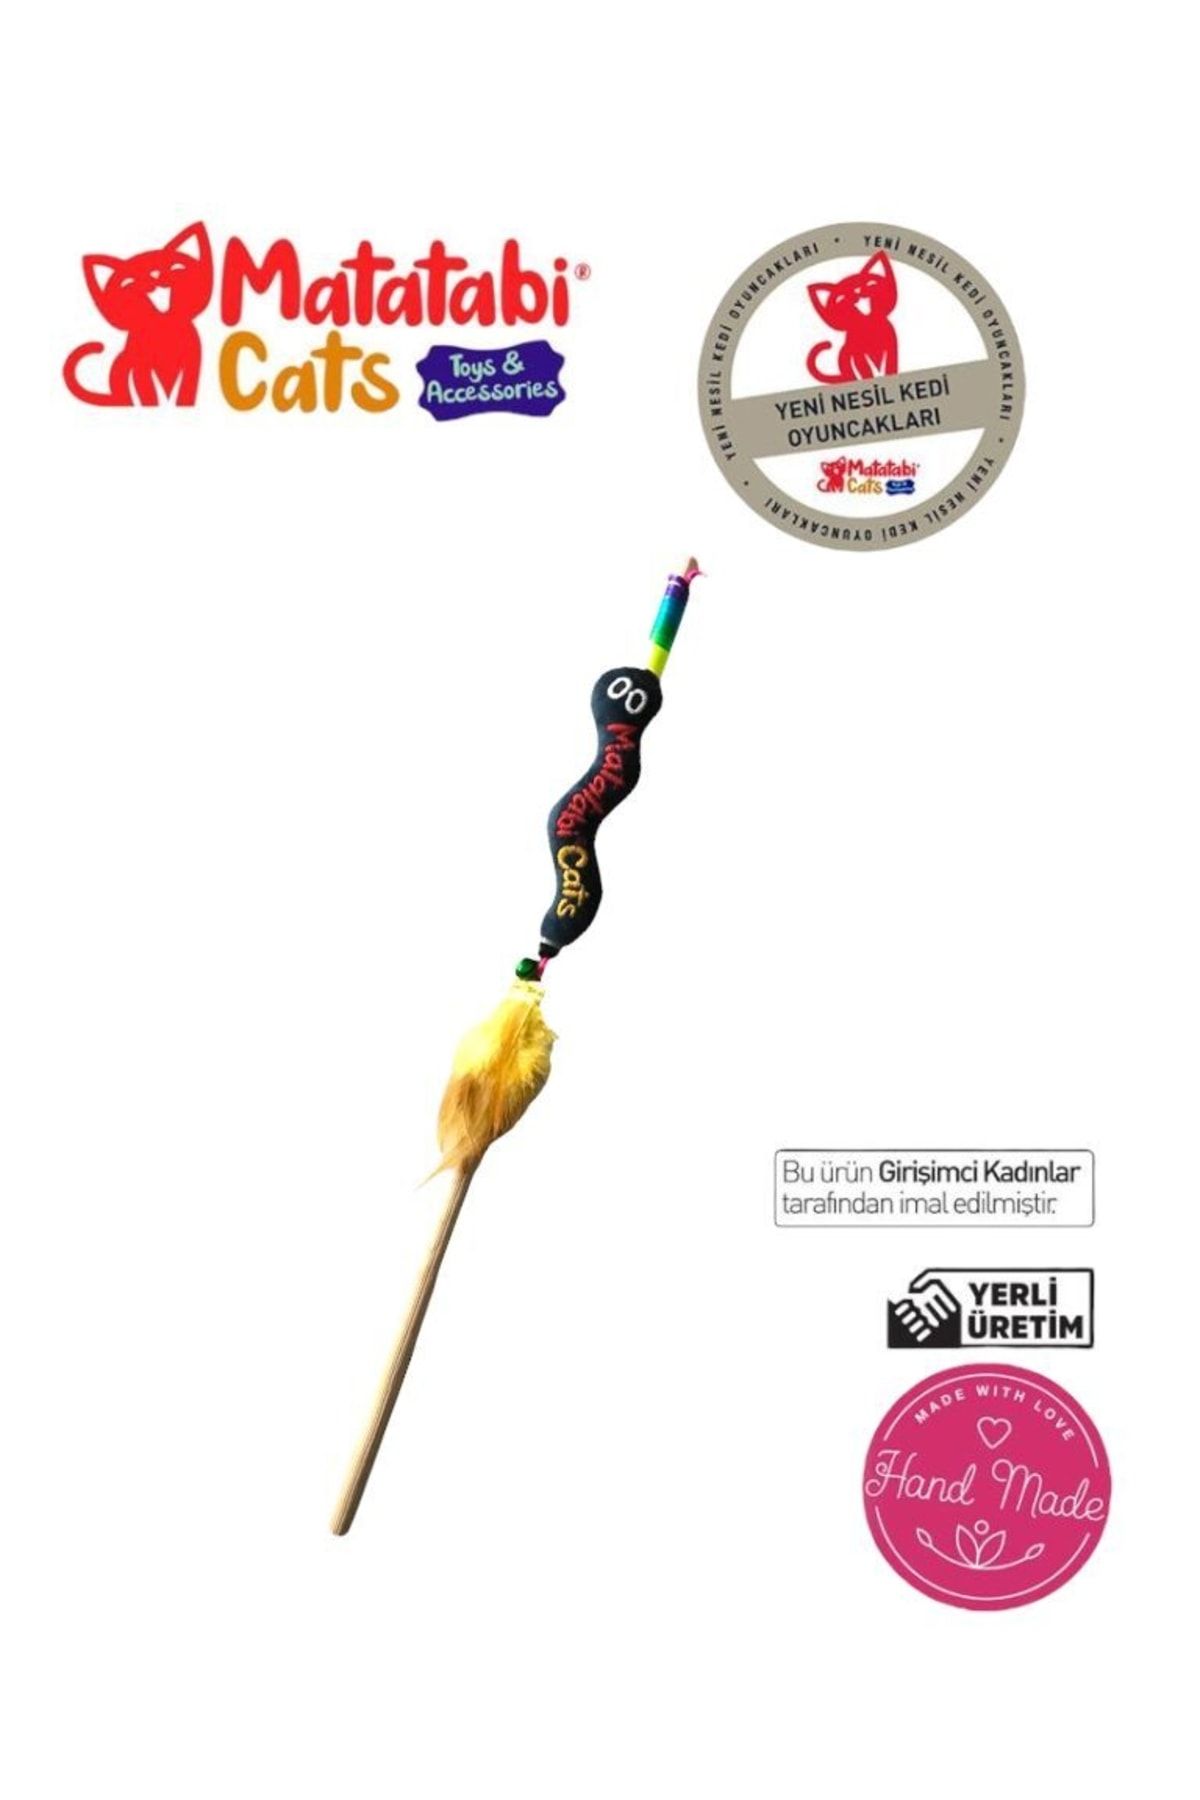 How to Make a Fishing Rod Cat Toy